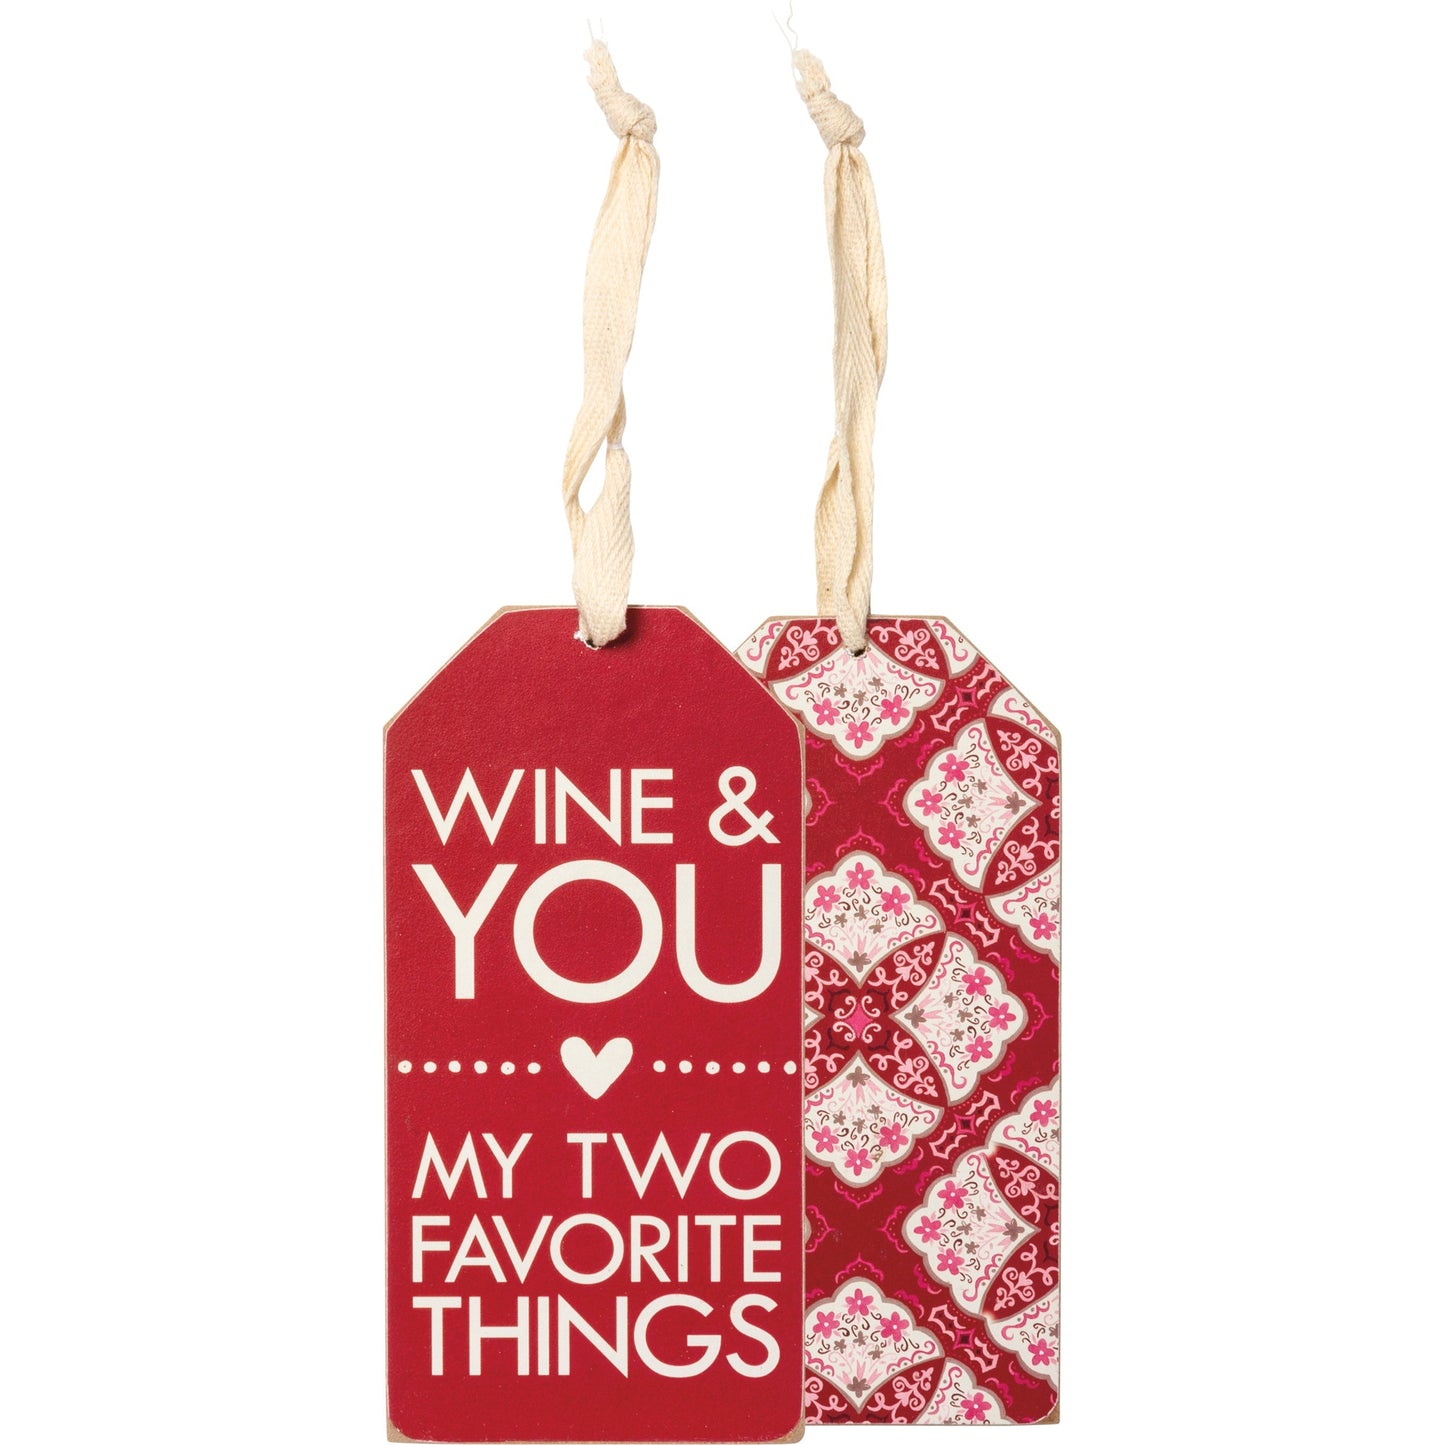 Wine & You - My Two Favorite Things Wooden Wine Bottle Tag